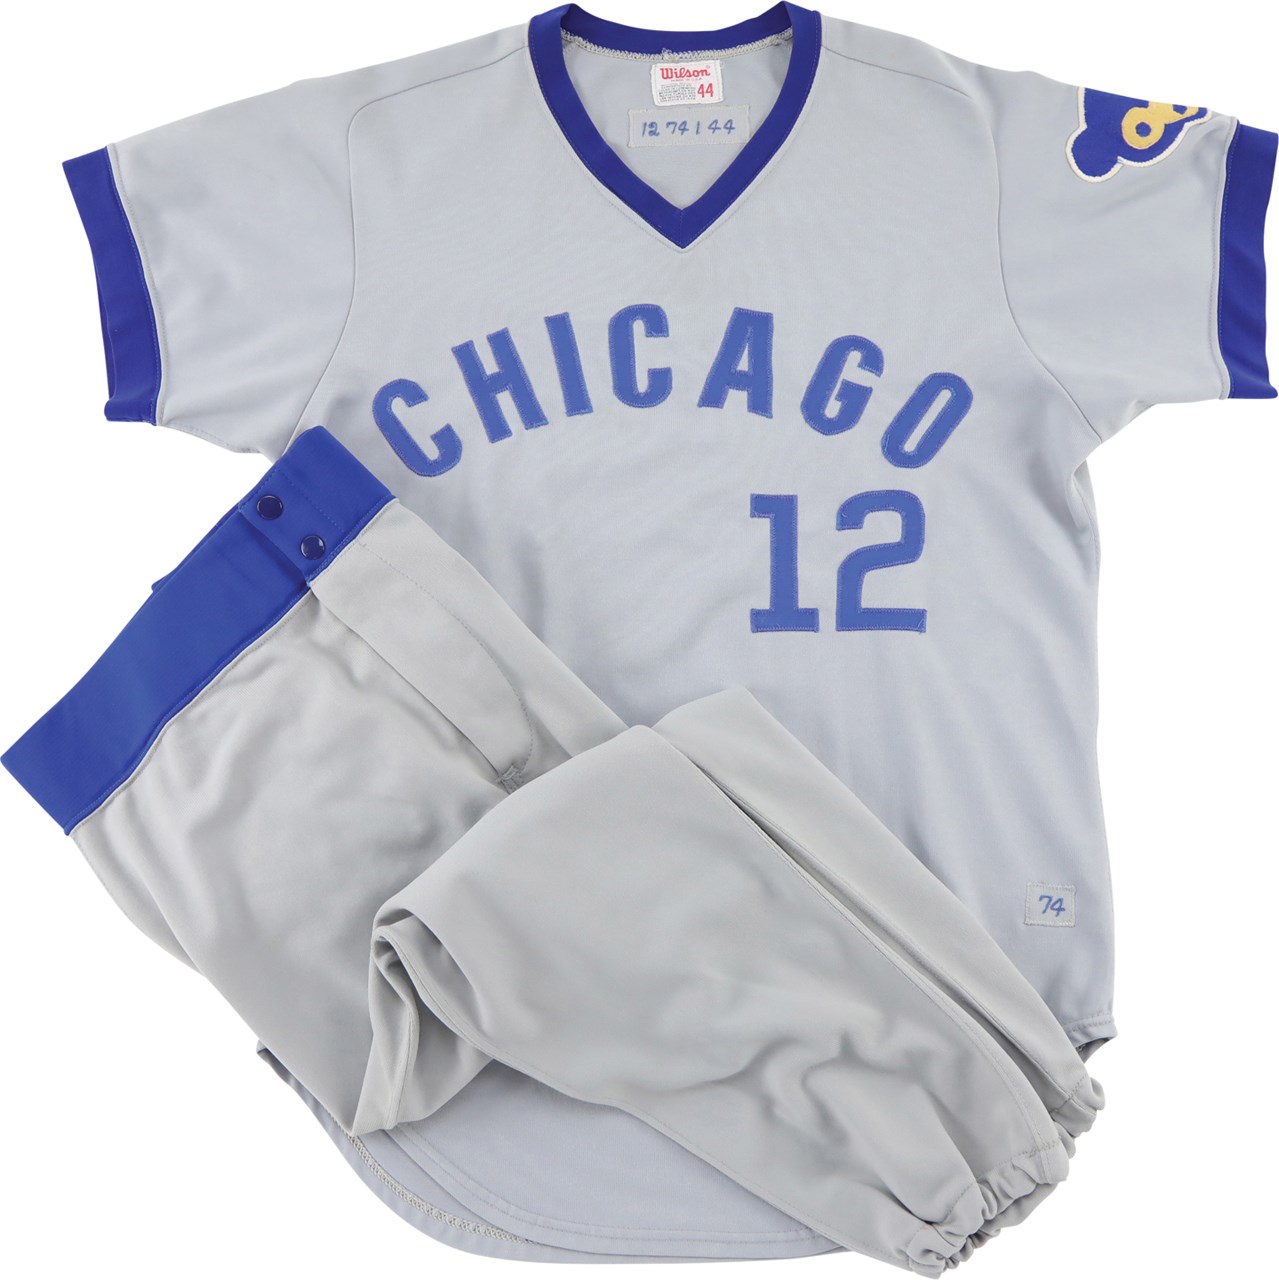 Baseball Equipment - 1974 Andre Thornton Chicago Cubs Game Worn Uniform (Photo-Matched)